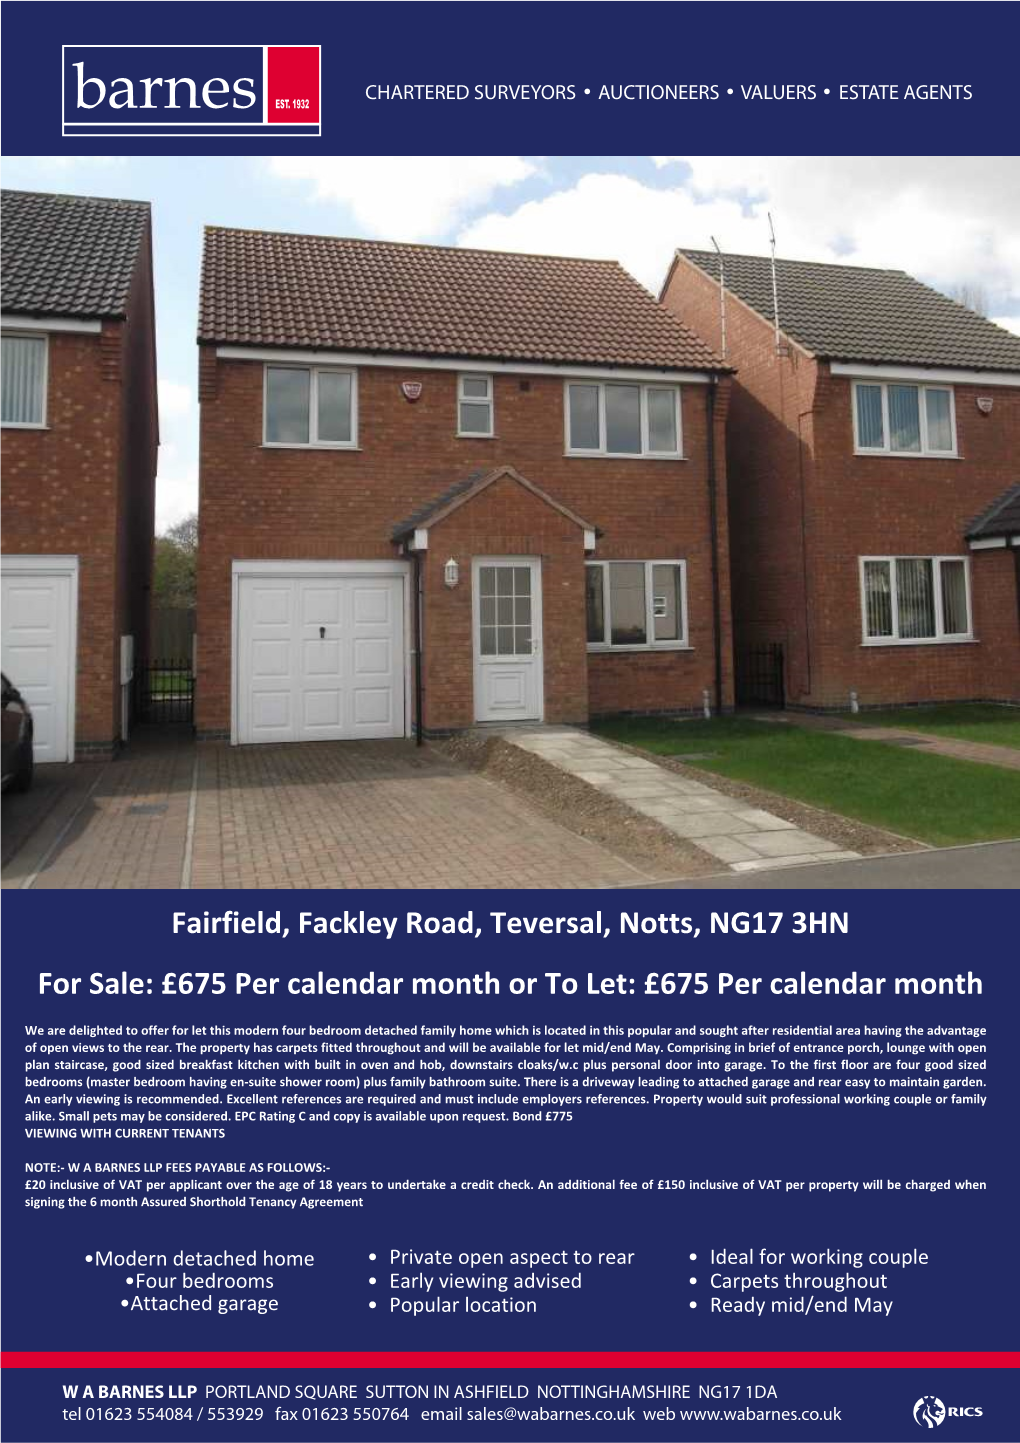 Fairfield, Fackley Road, Teversal, Notts, NG17 3HN for Sale: £675 Per Calendar Month Or to Let: £675 Per Calendar Month